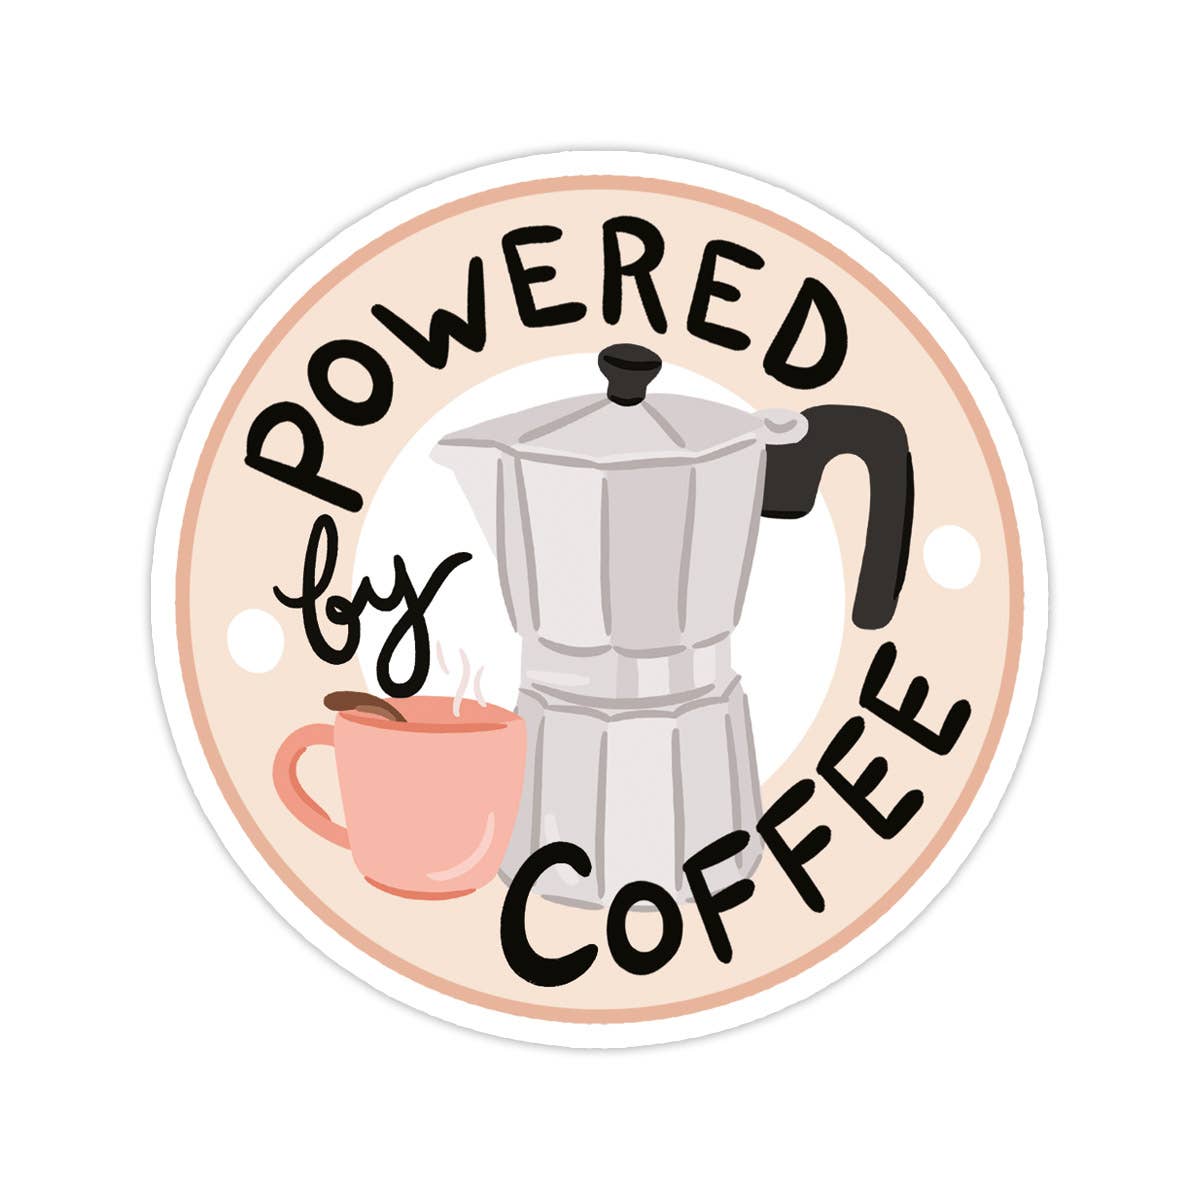 Powered by Coffee Vinyl Sticker - Funny Gift, Back to School